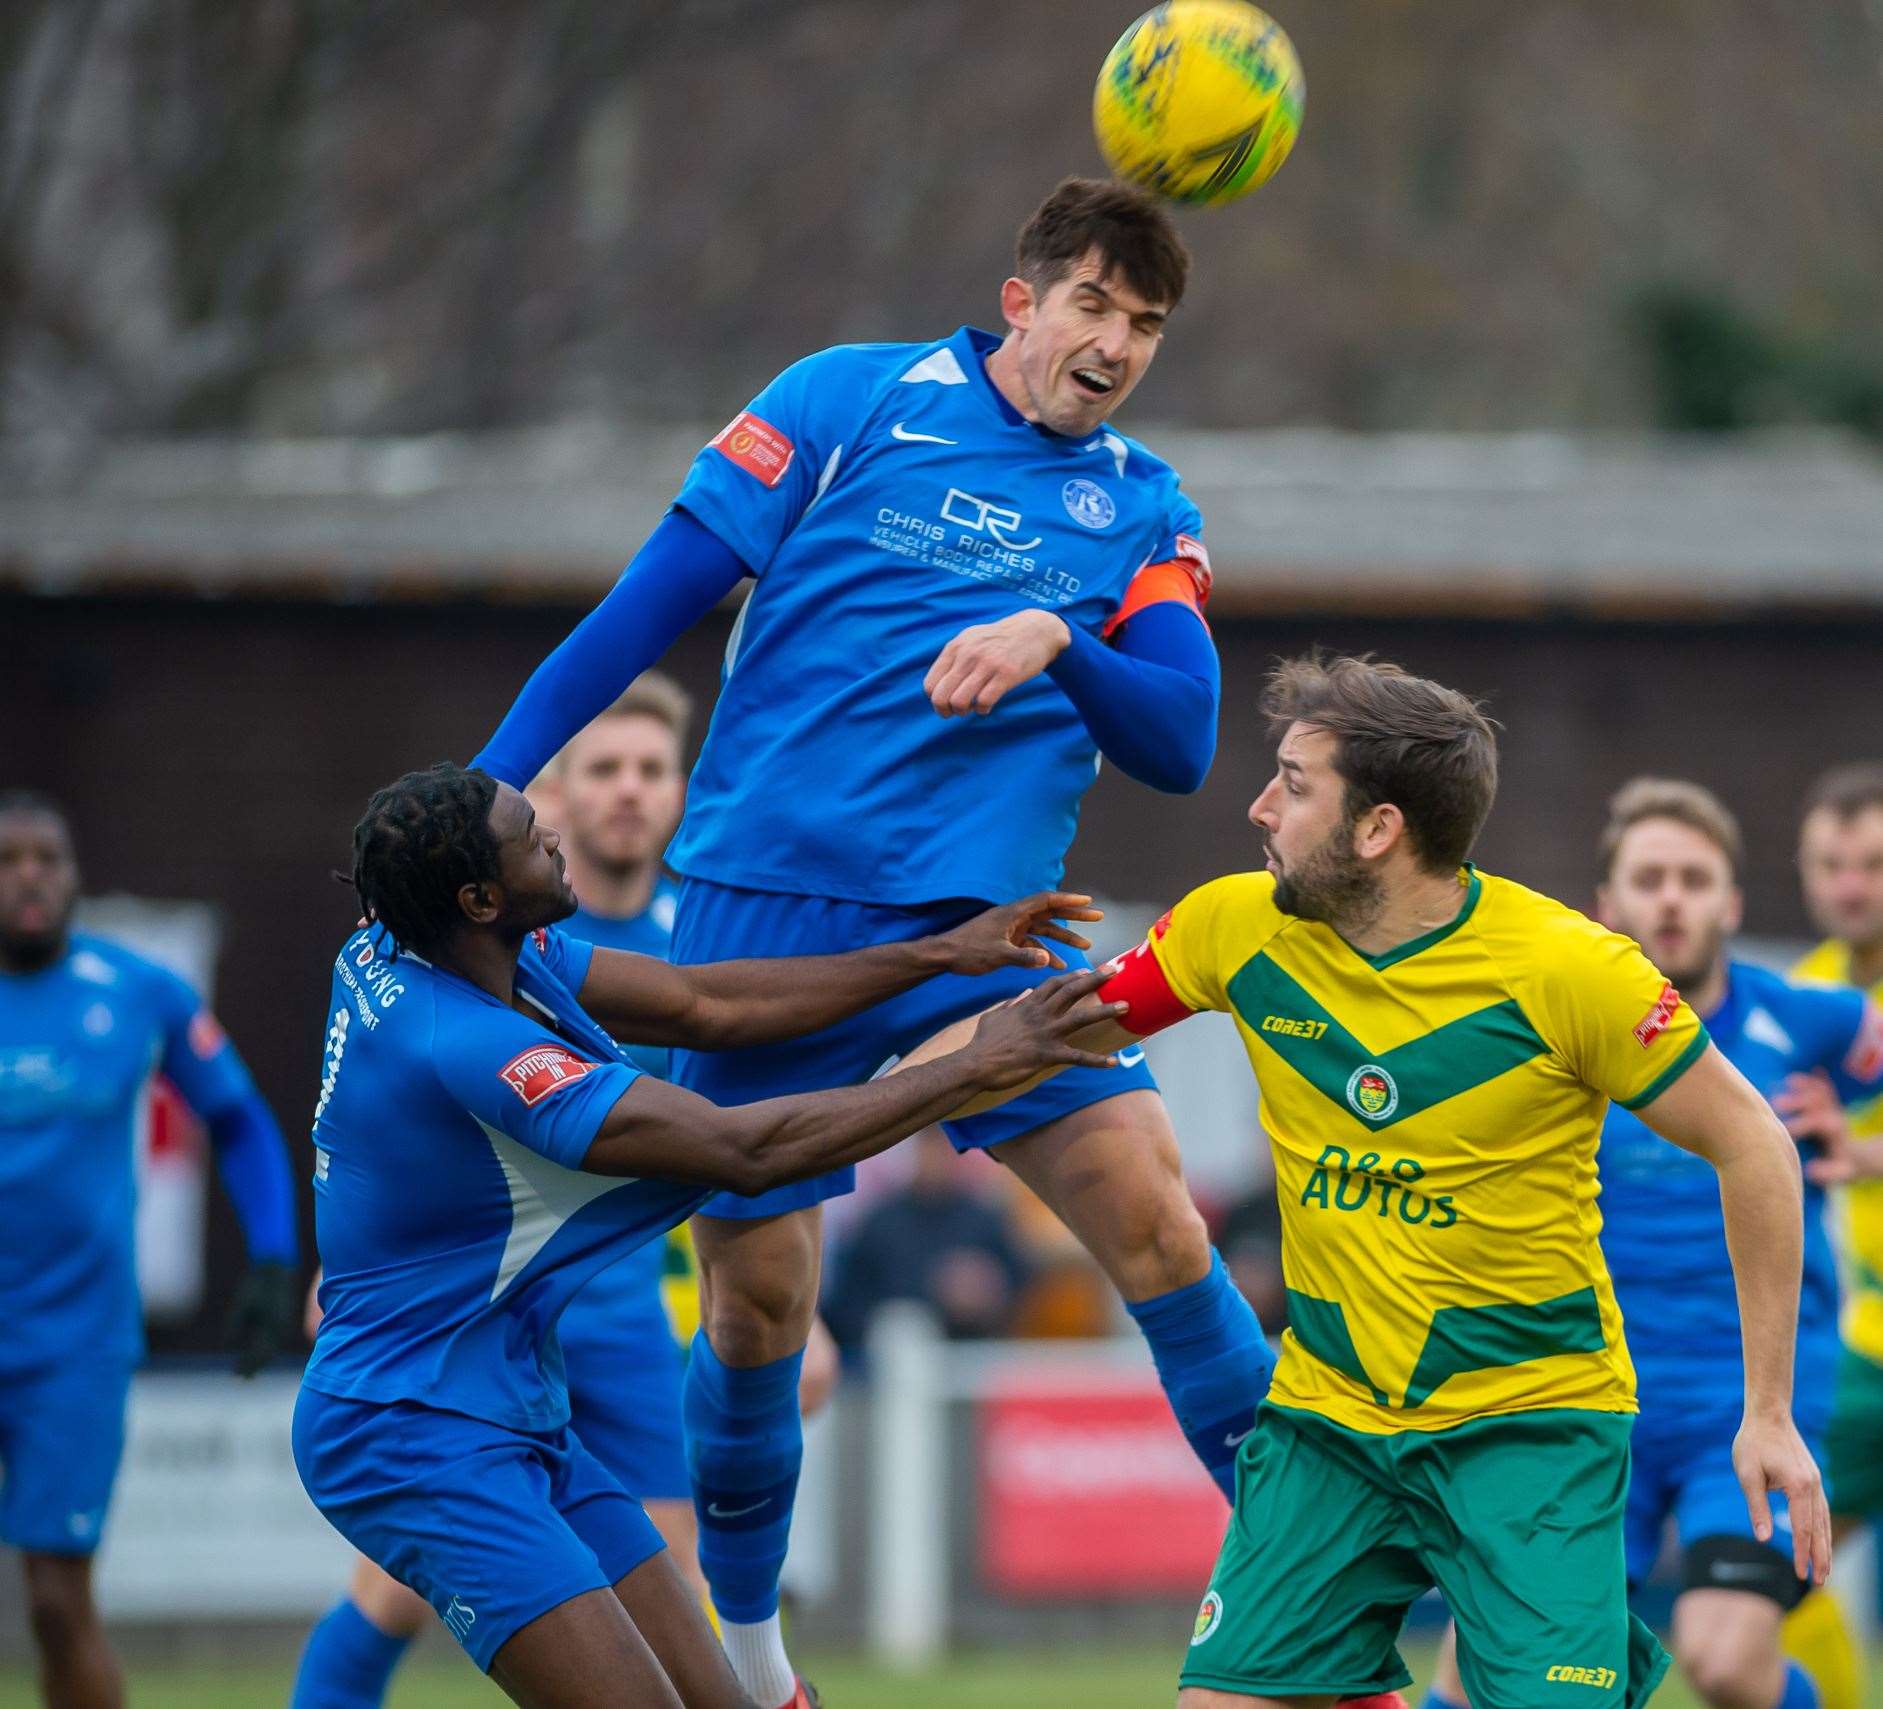 Herne Bay's Jacques Kpohomouh, left, in the thick of the action alongside Ashford defender Liam Friend and Herne Bay captain Laurence Harvey during Bay's recent home defeat. Picture: Ian Scammell